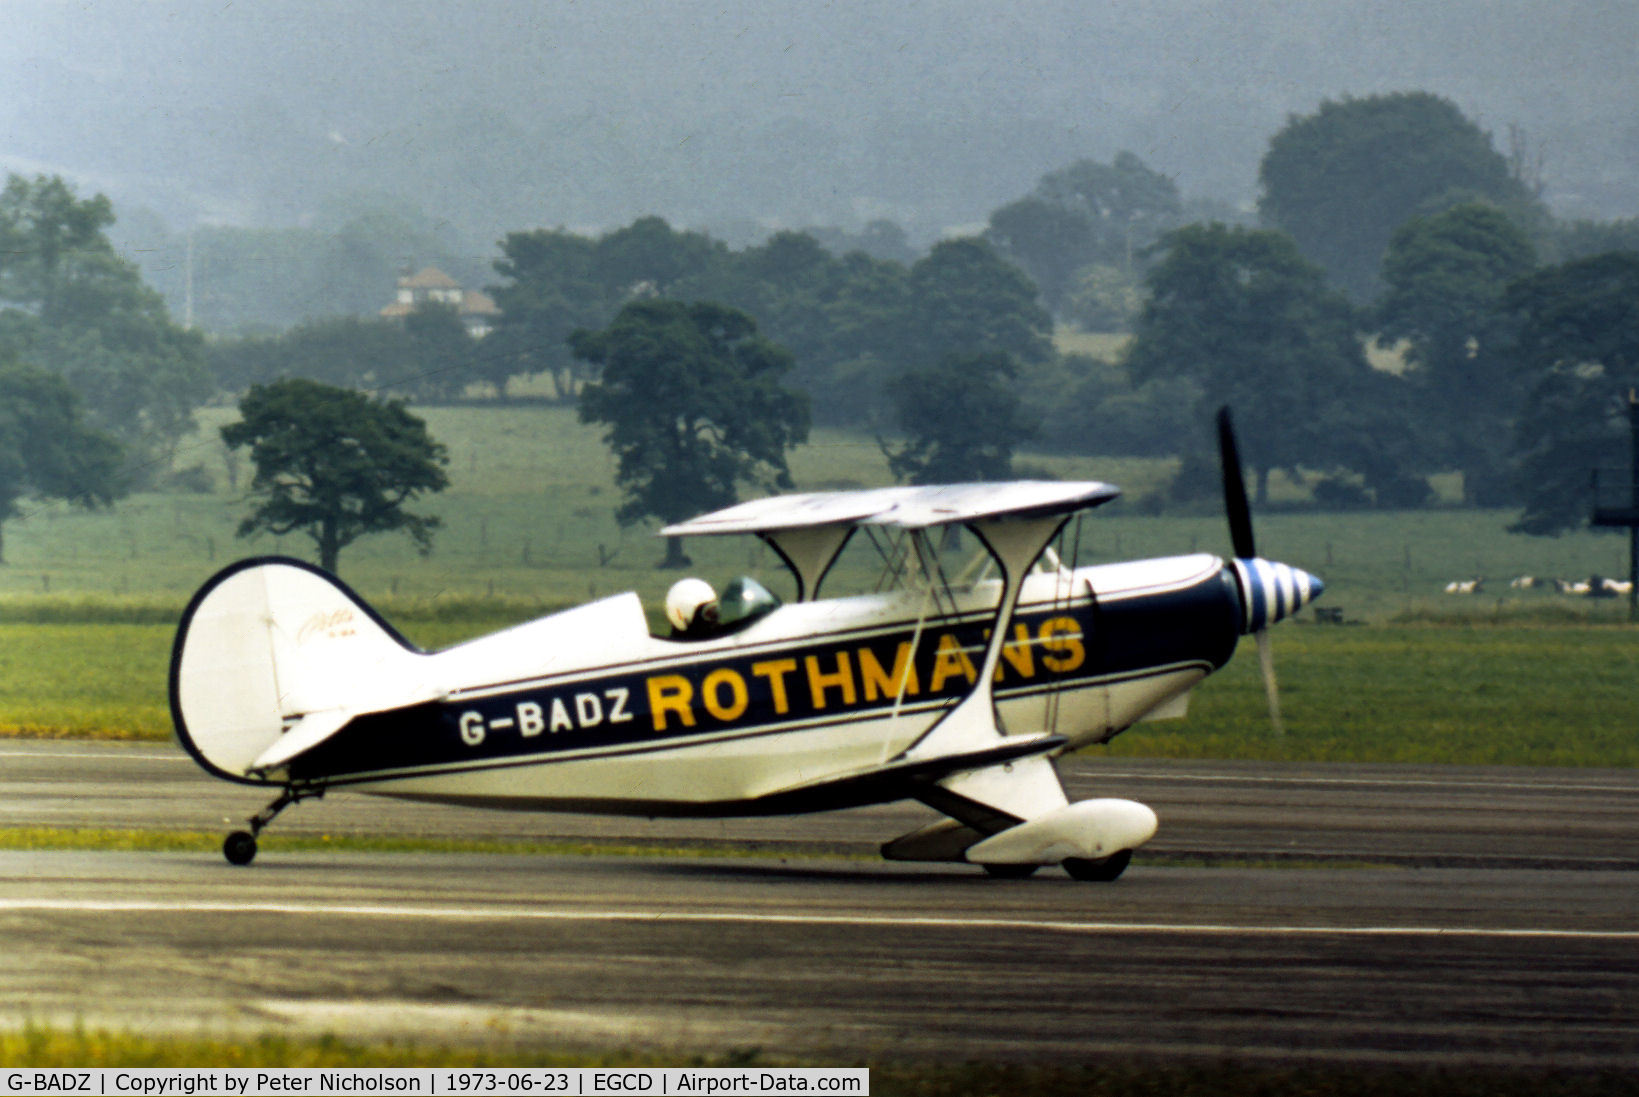 G-BADZ, 1972 Aerotek Pitts S-2A Special C/N 2038, Pitts S-2A of the Rothmans aerobatic display team preparing for action at the 1973 Royal Air Force Association Airshow at Woodford.